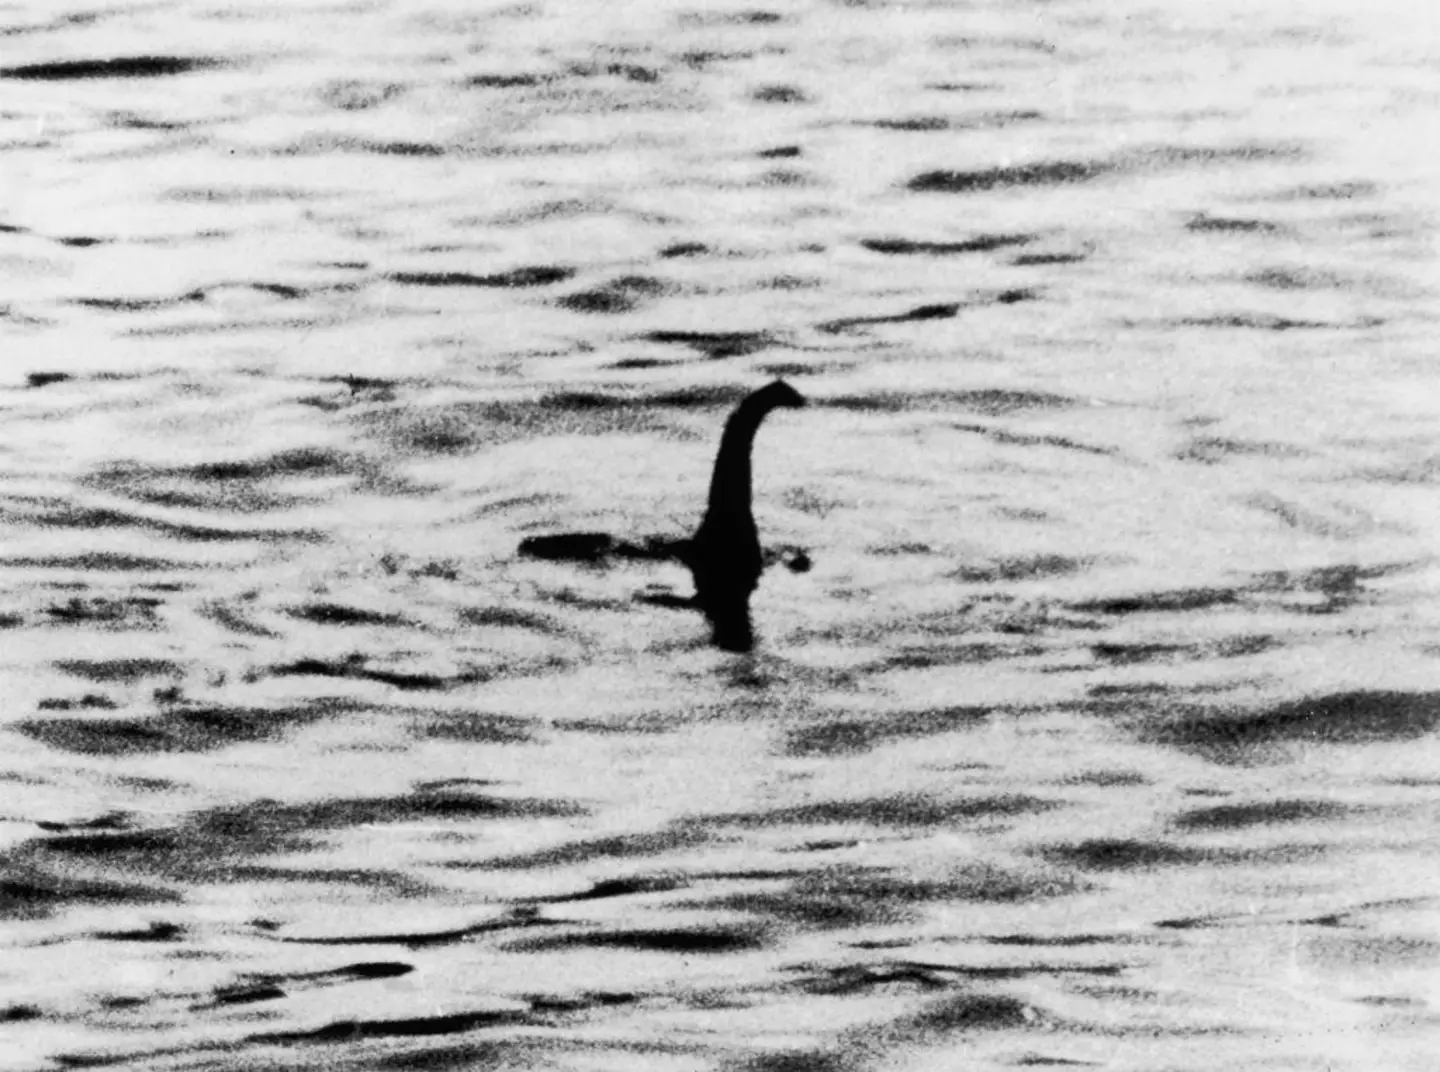 Is the Loch Ness monster real? (Keystone/Getty Images)